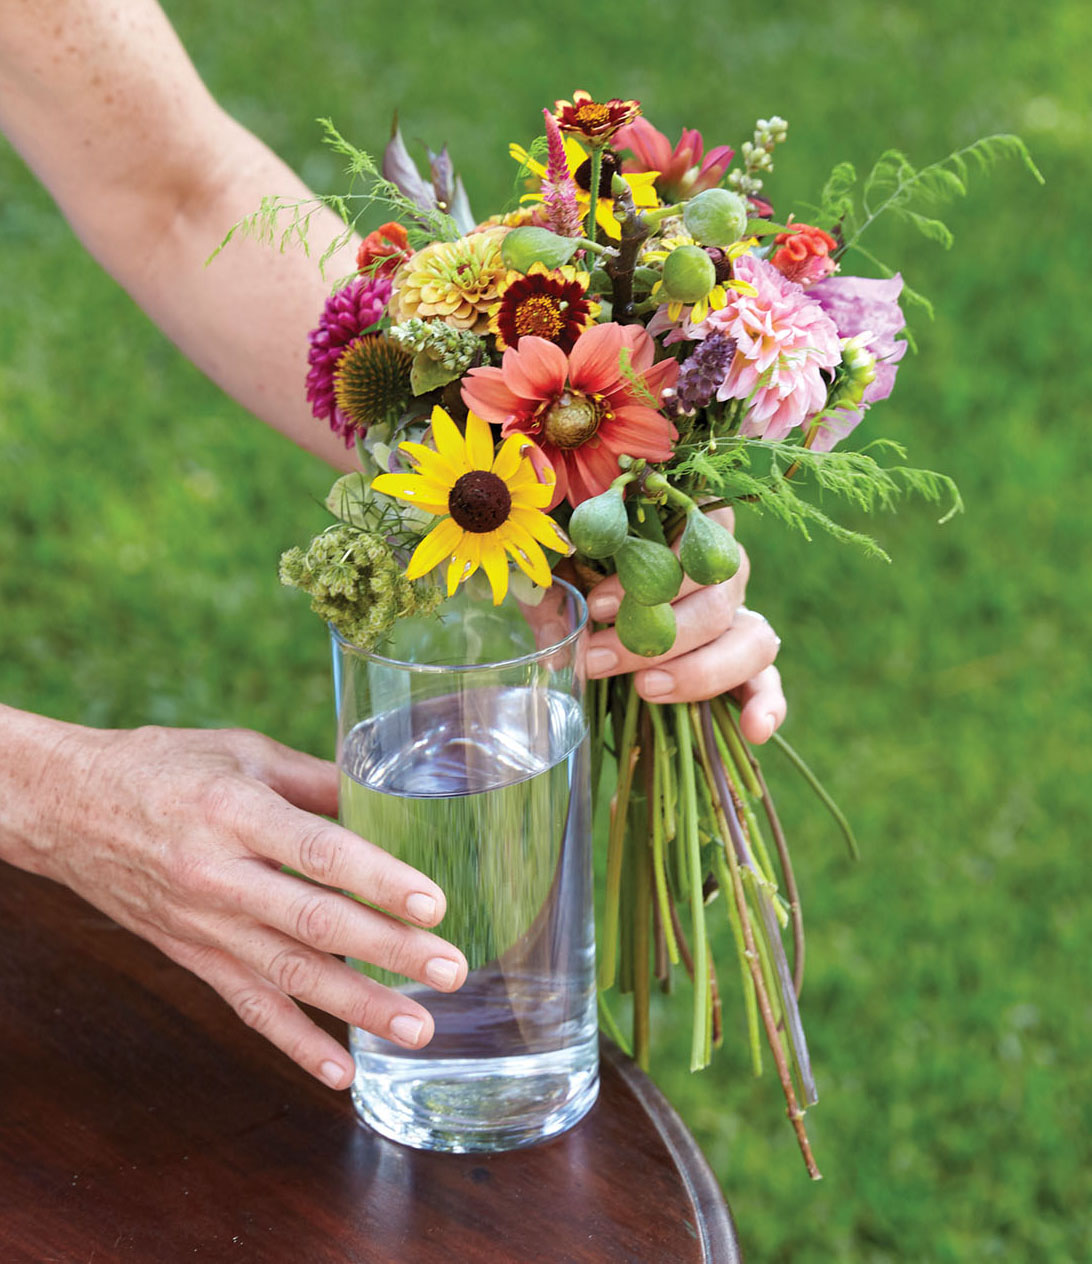 Kappi Naftel holds her bouquet against a glass to judge stem length. The bind point is near the top of the vessel.